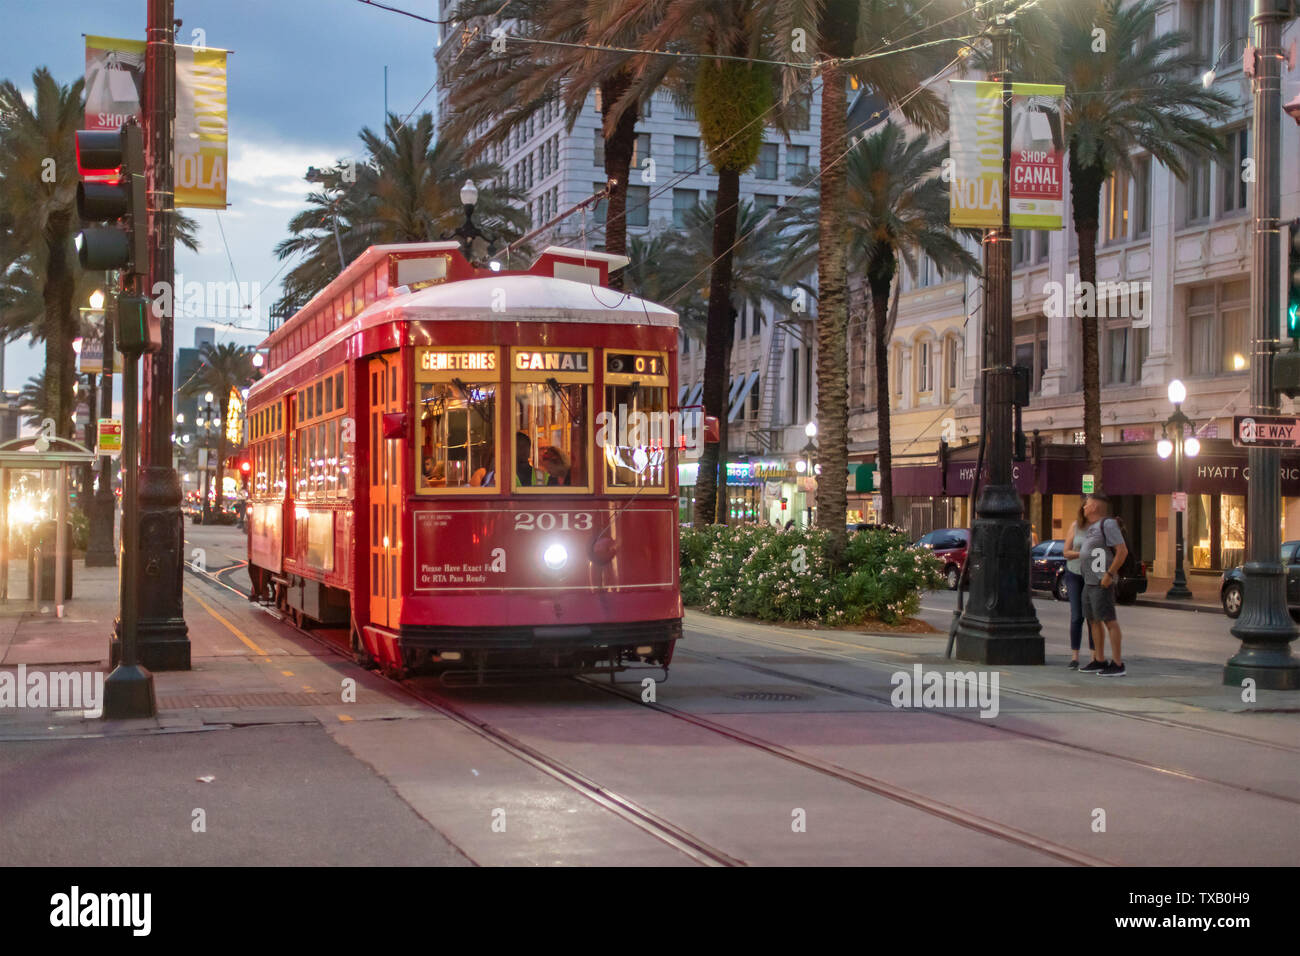 New Orleans, Louisiana - A New Orleans streetcar on Canal Street. Stock Photo